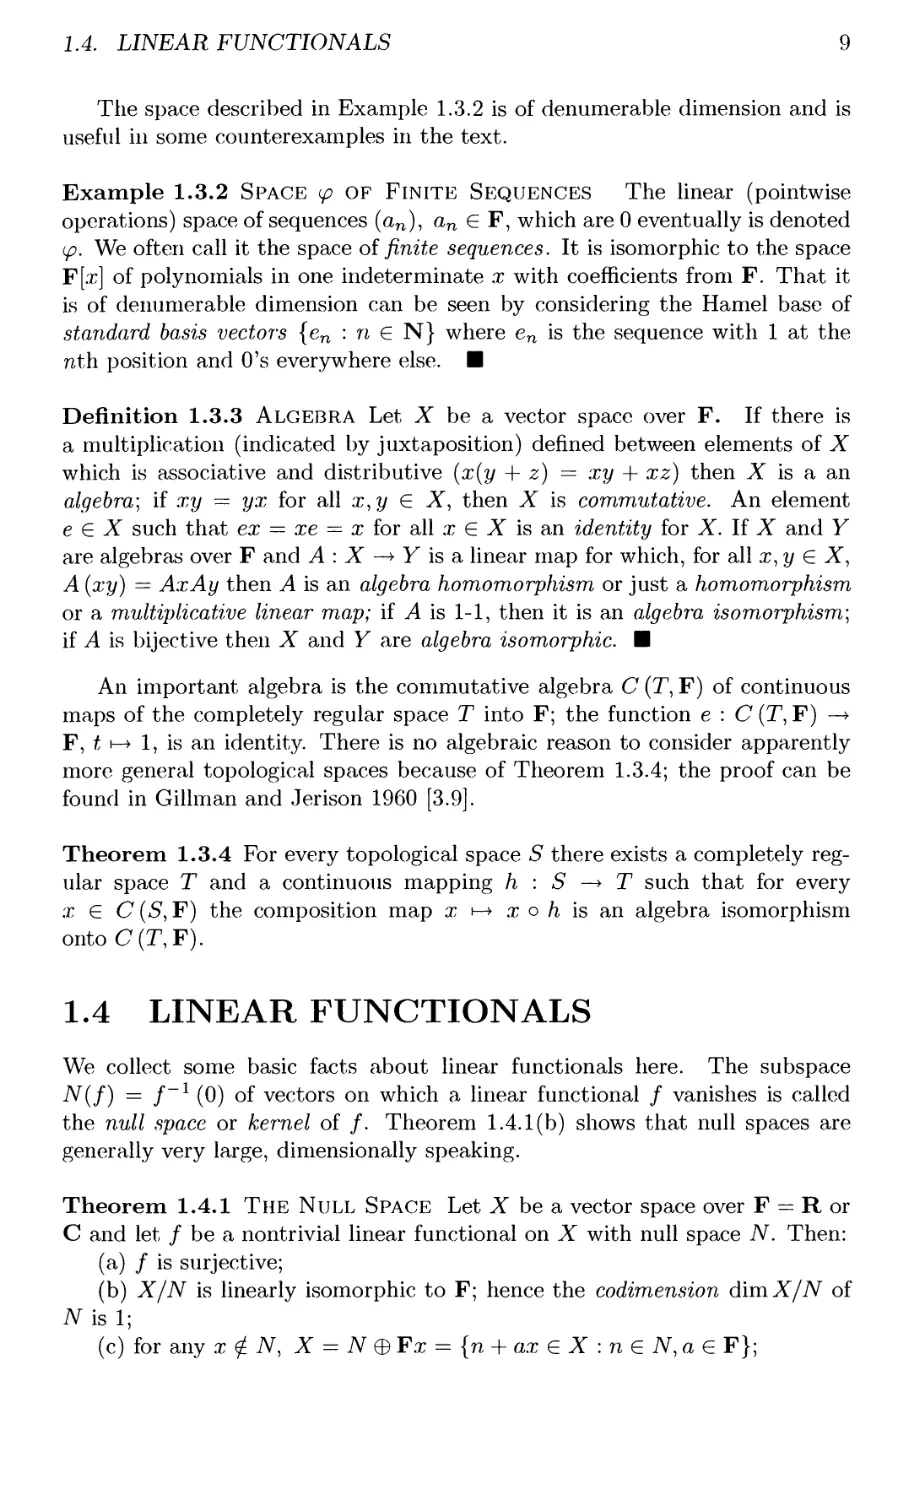 1.4 LINEAR FUNCTIONALS